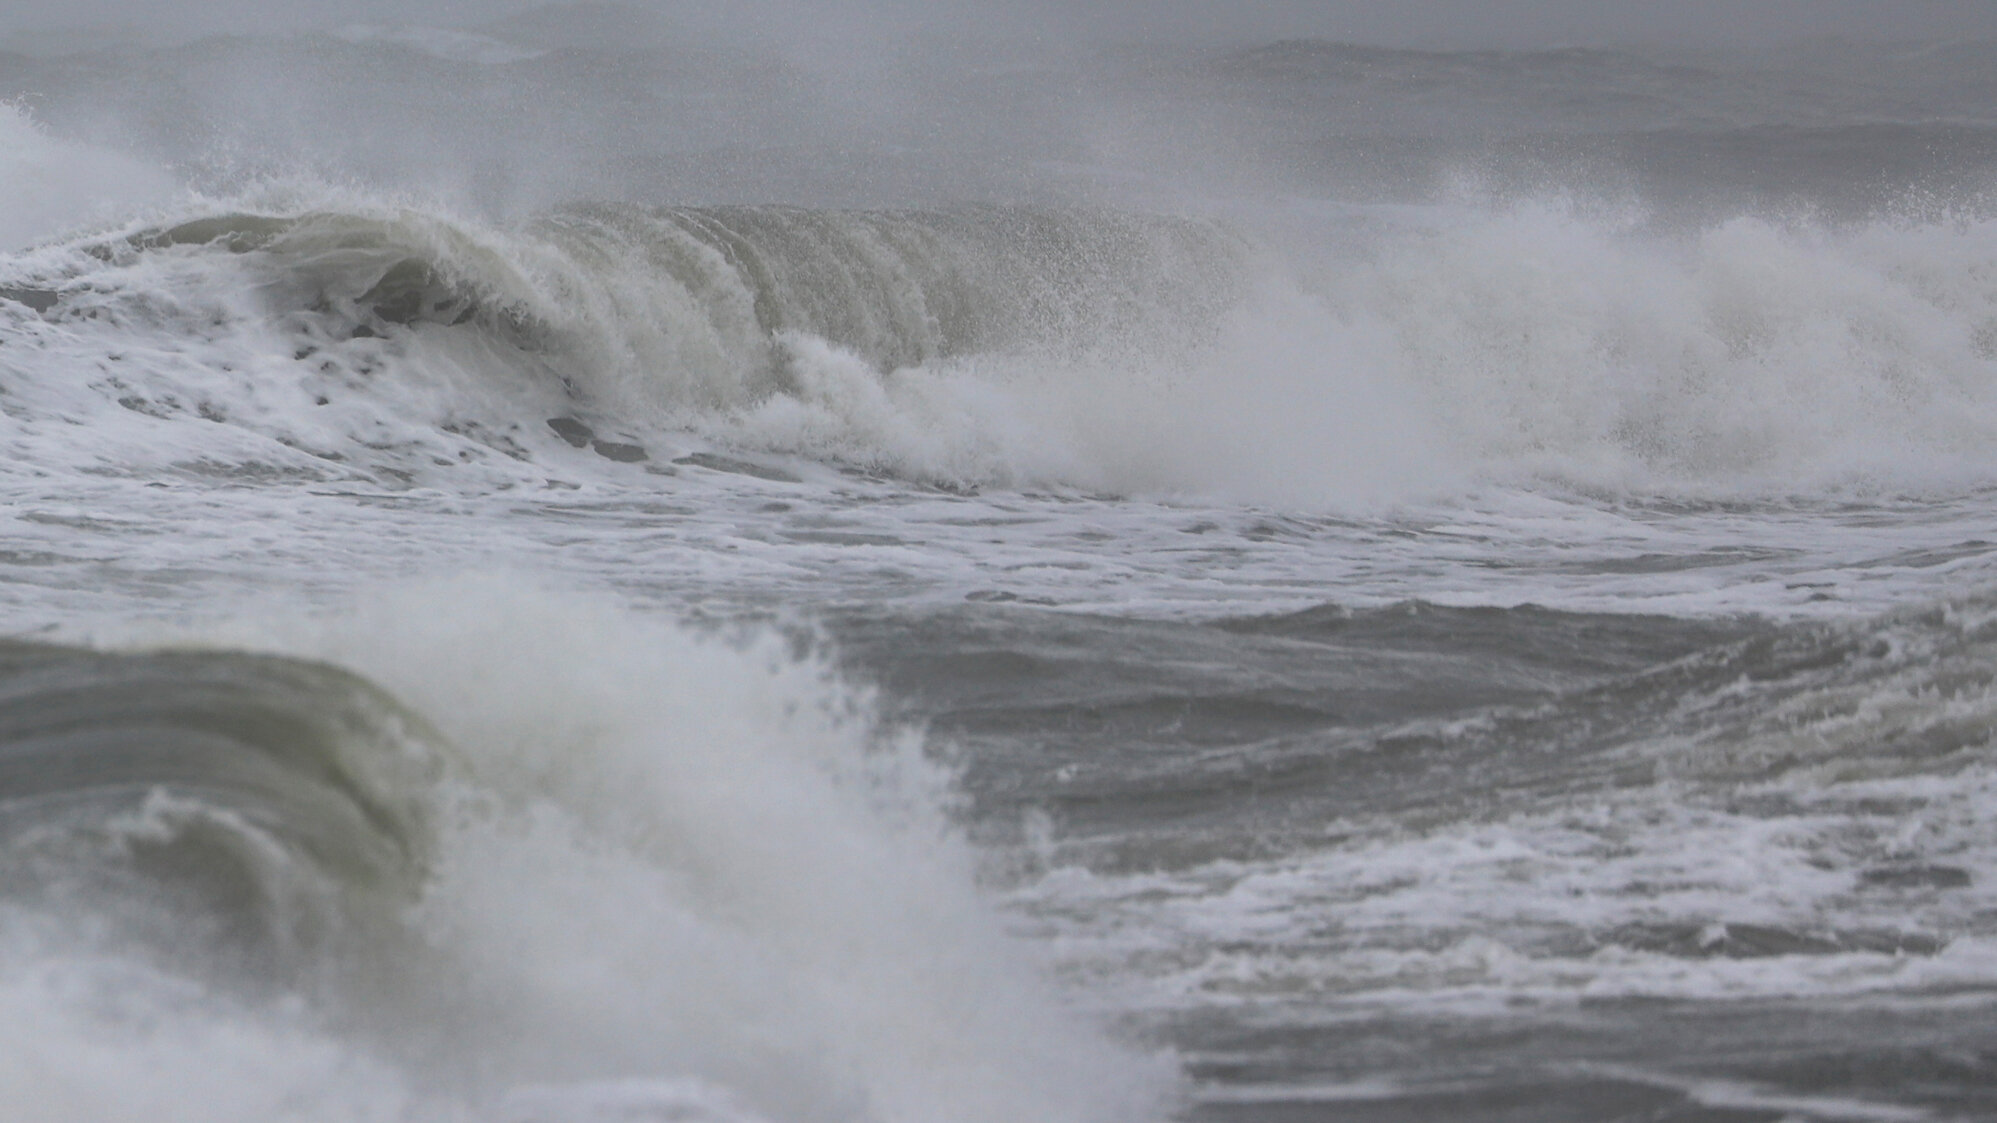  Waves at Rudee Inlet during the Mid-November Nor'easter / 17 Nov 